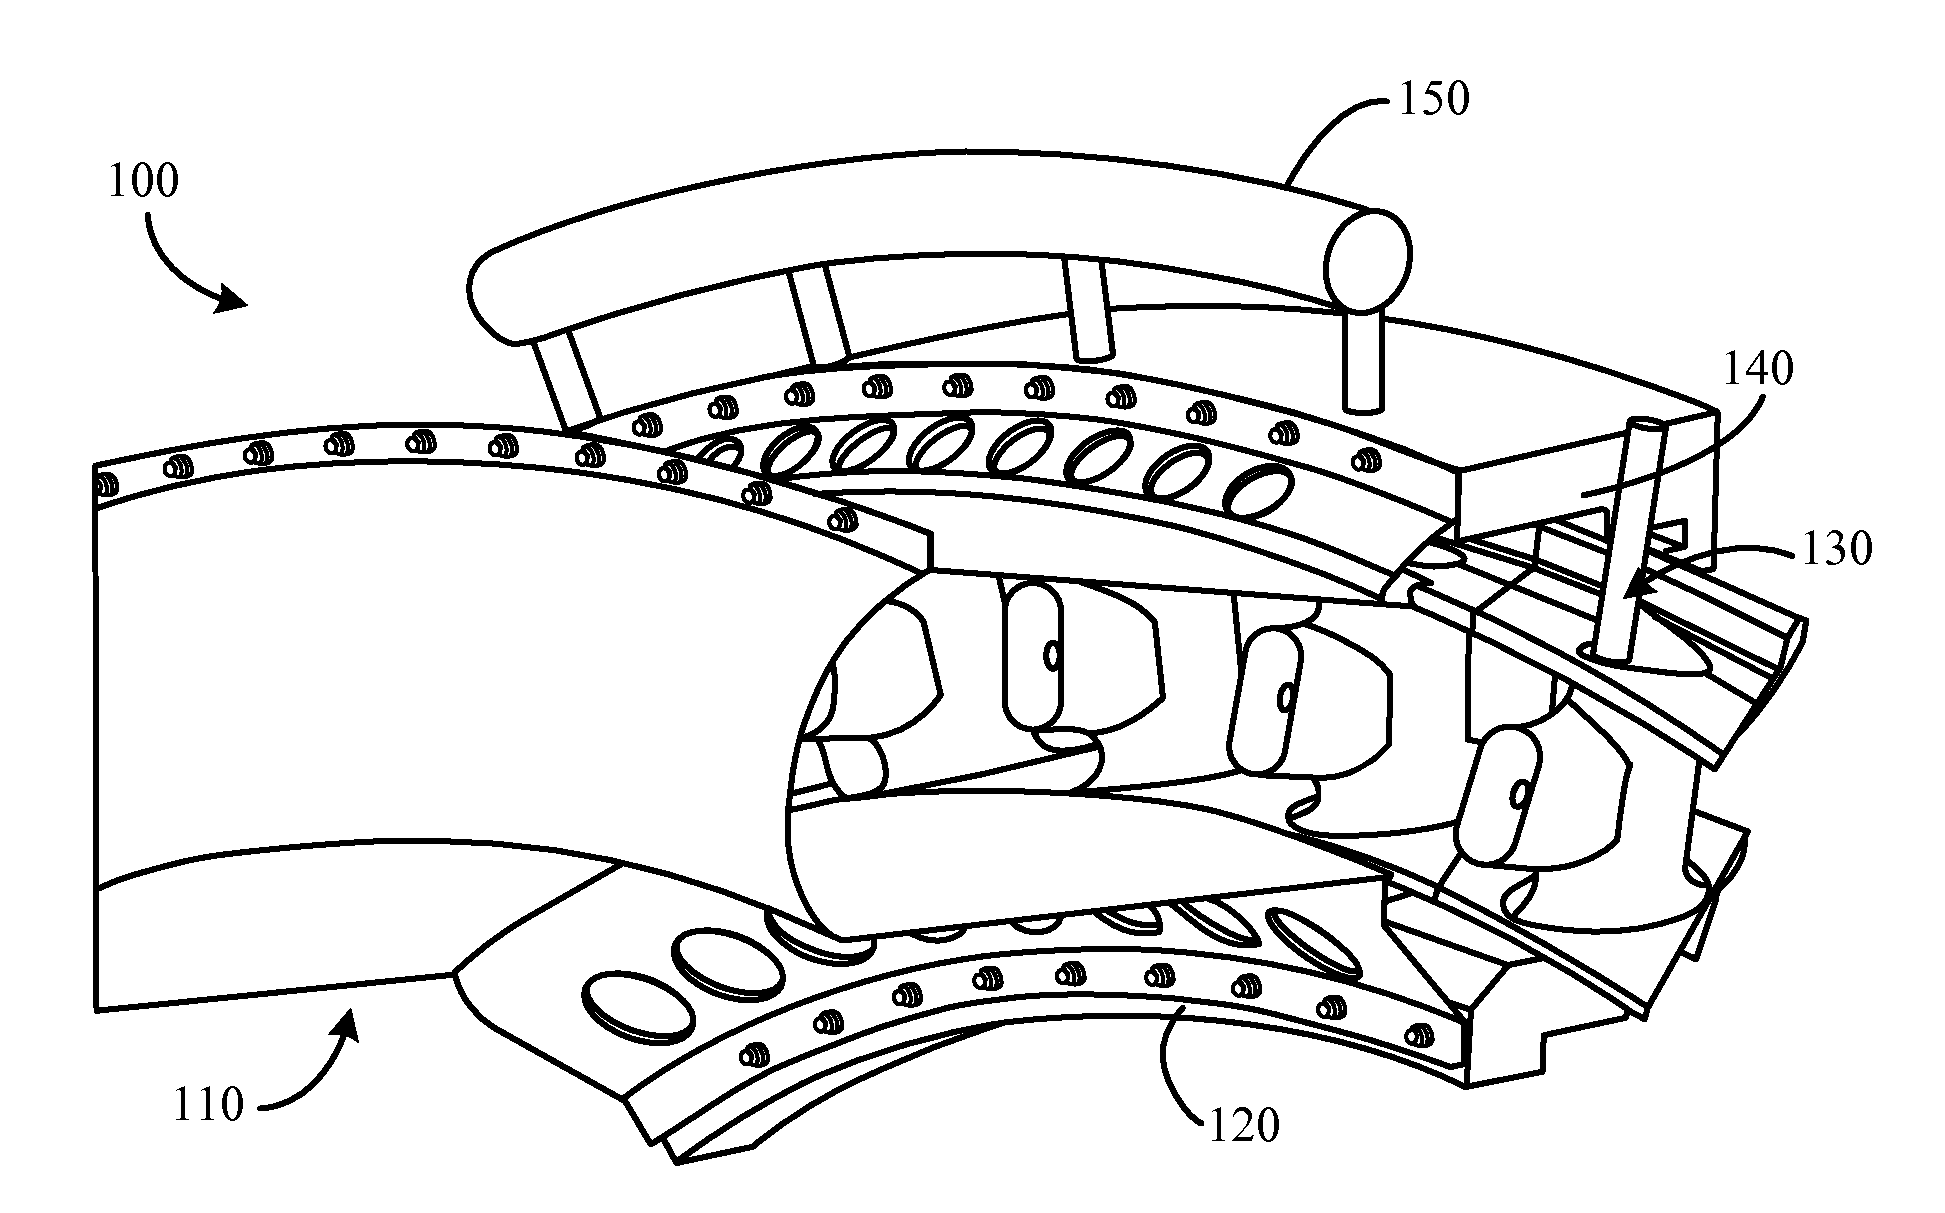 Reverse-flow gas turbine combustion system